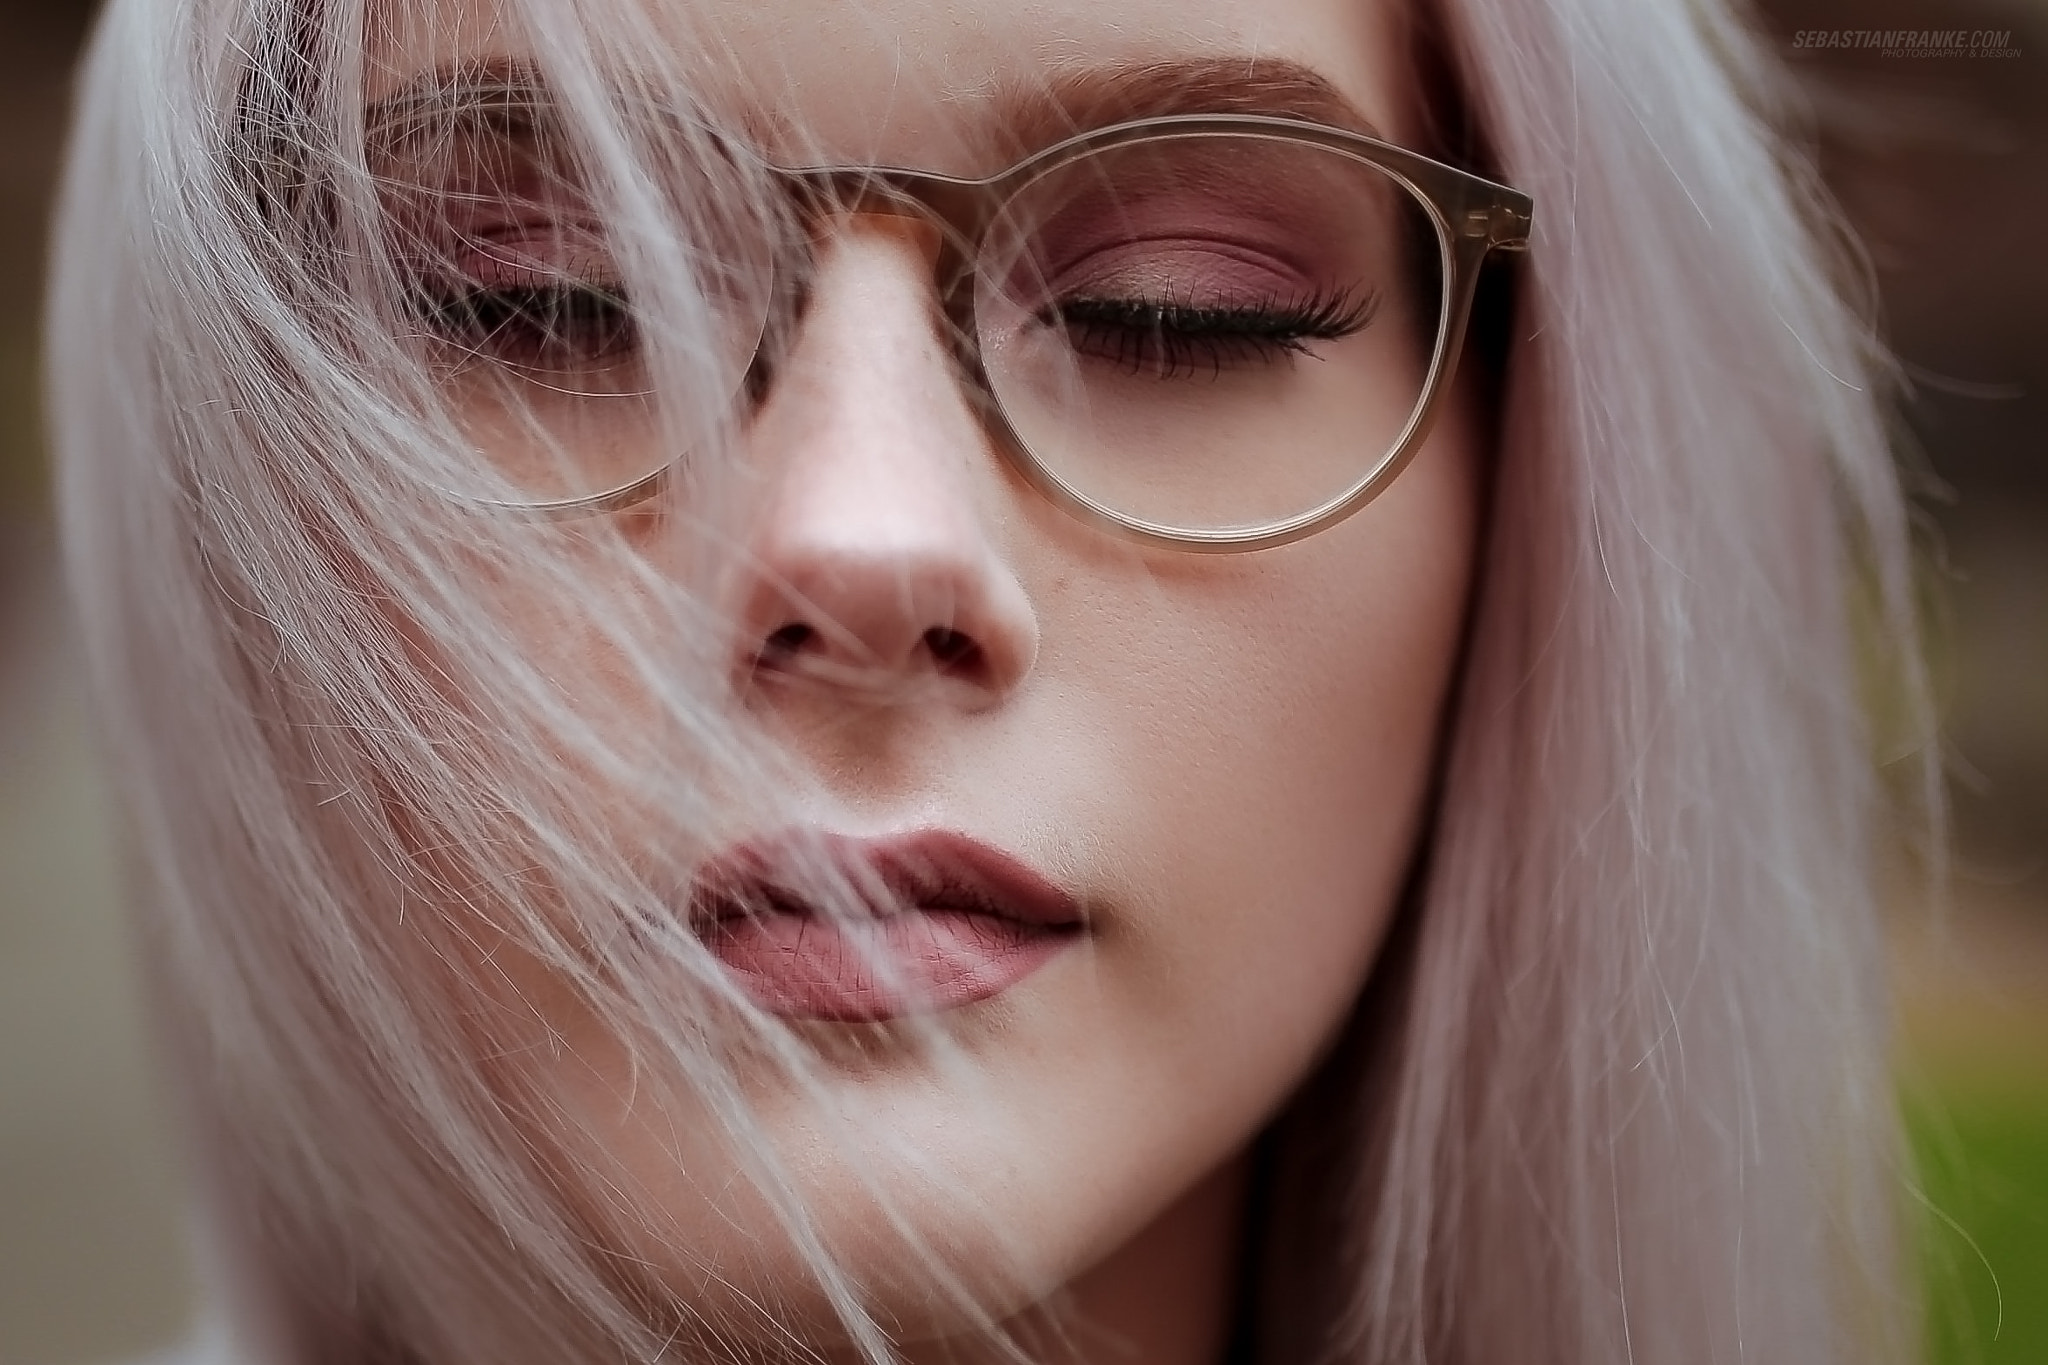 People 2048x1365 women face portrait closeup women with glasses closed eyes Katharina Krug